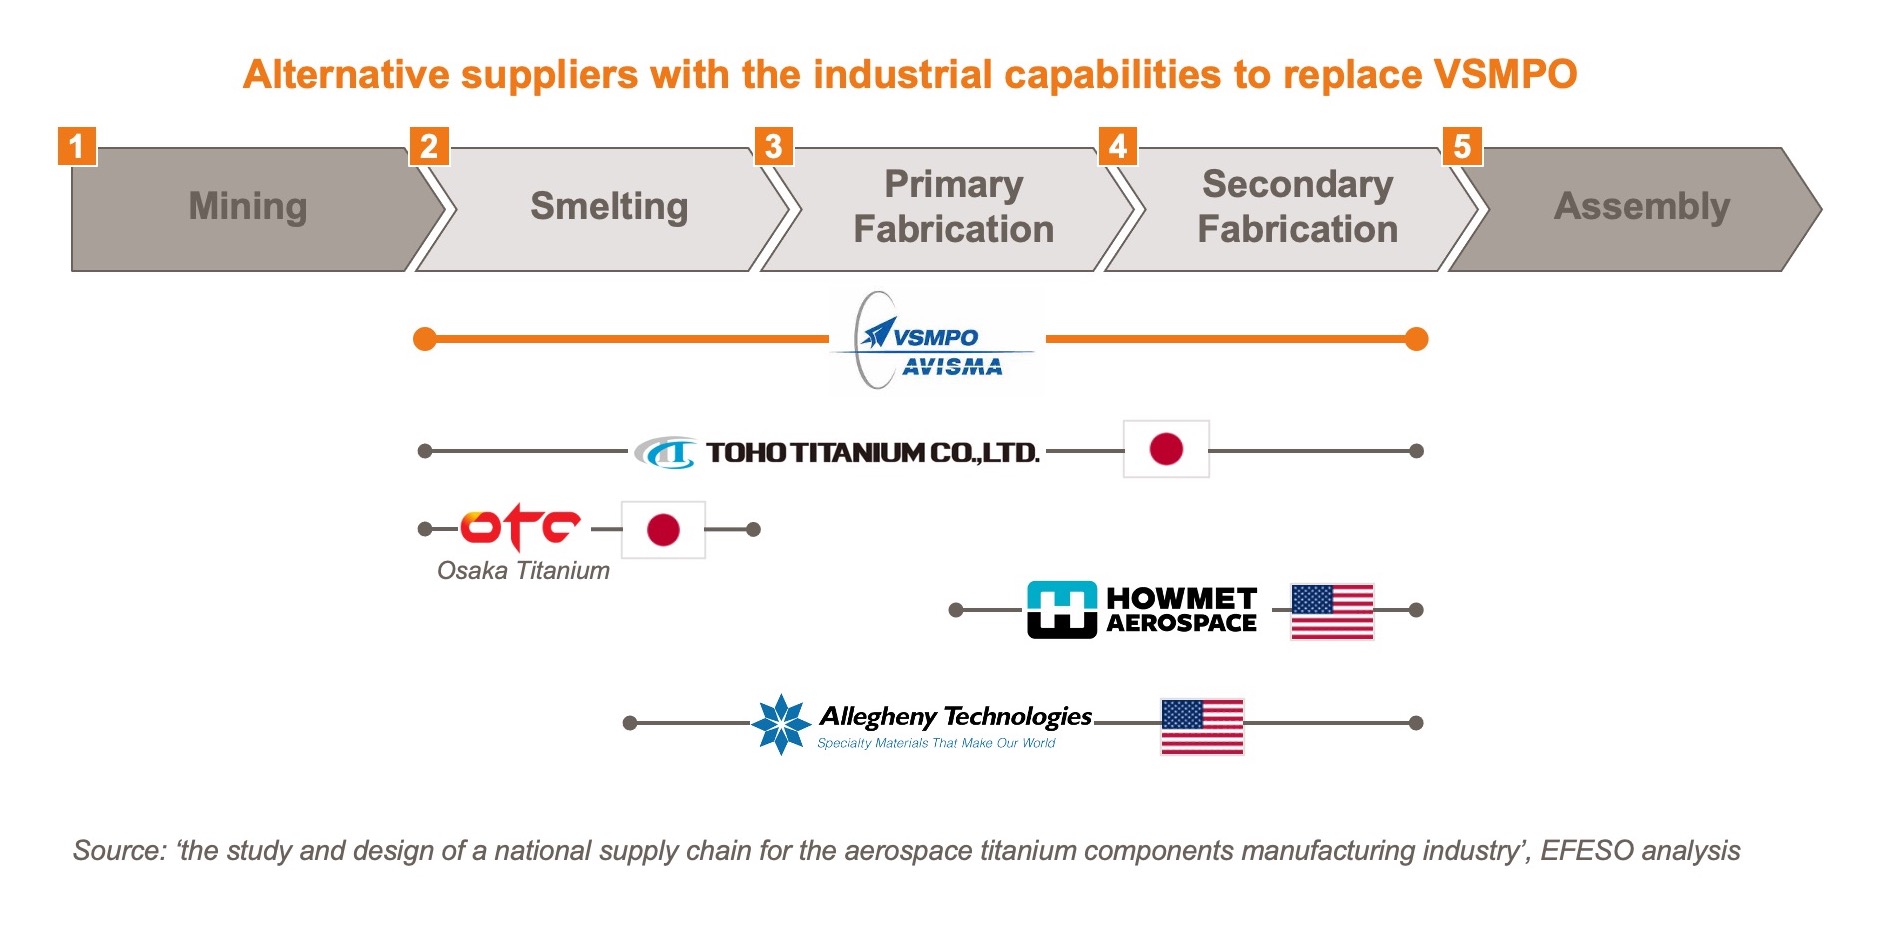 Alternative suppliers with the industrial capabilities to replace VSMPO